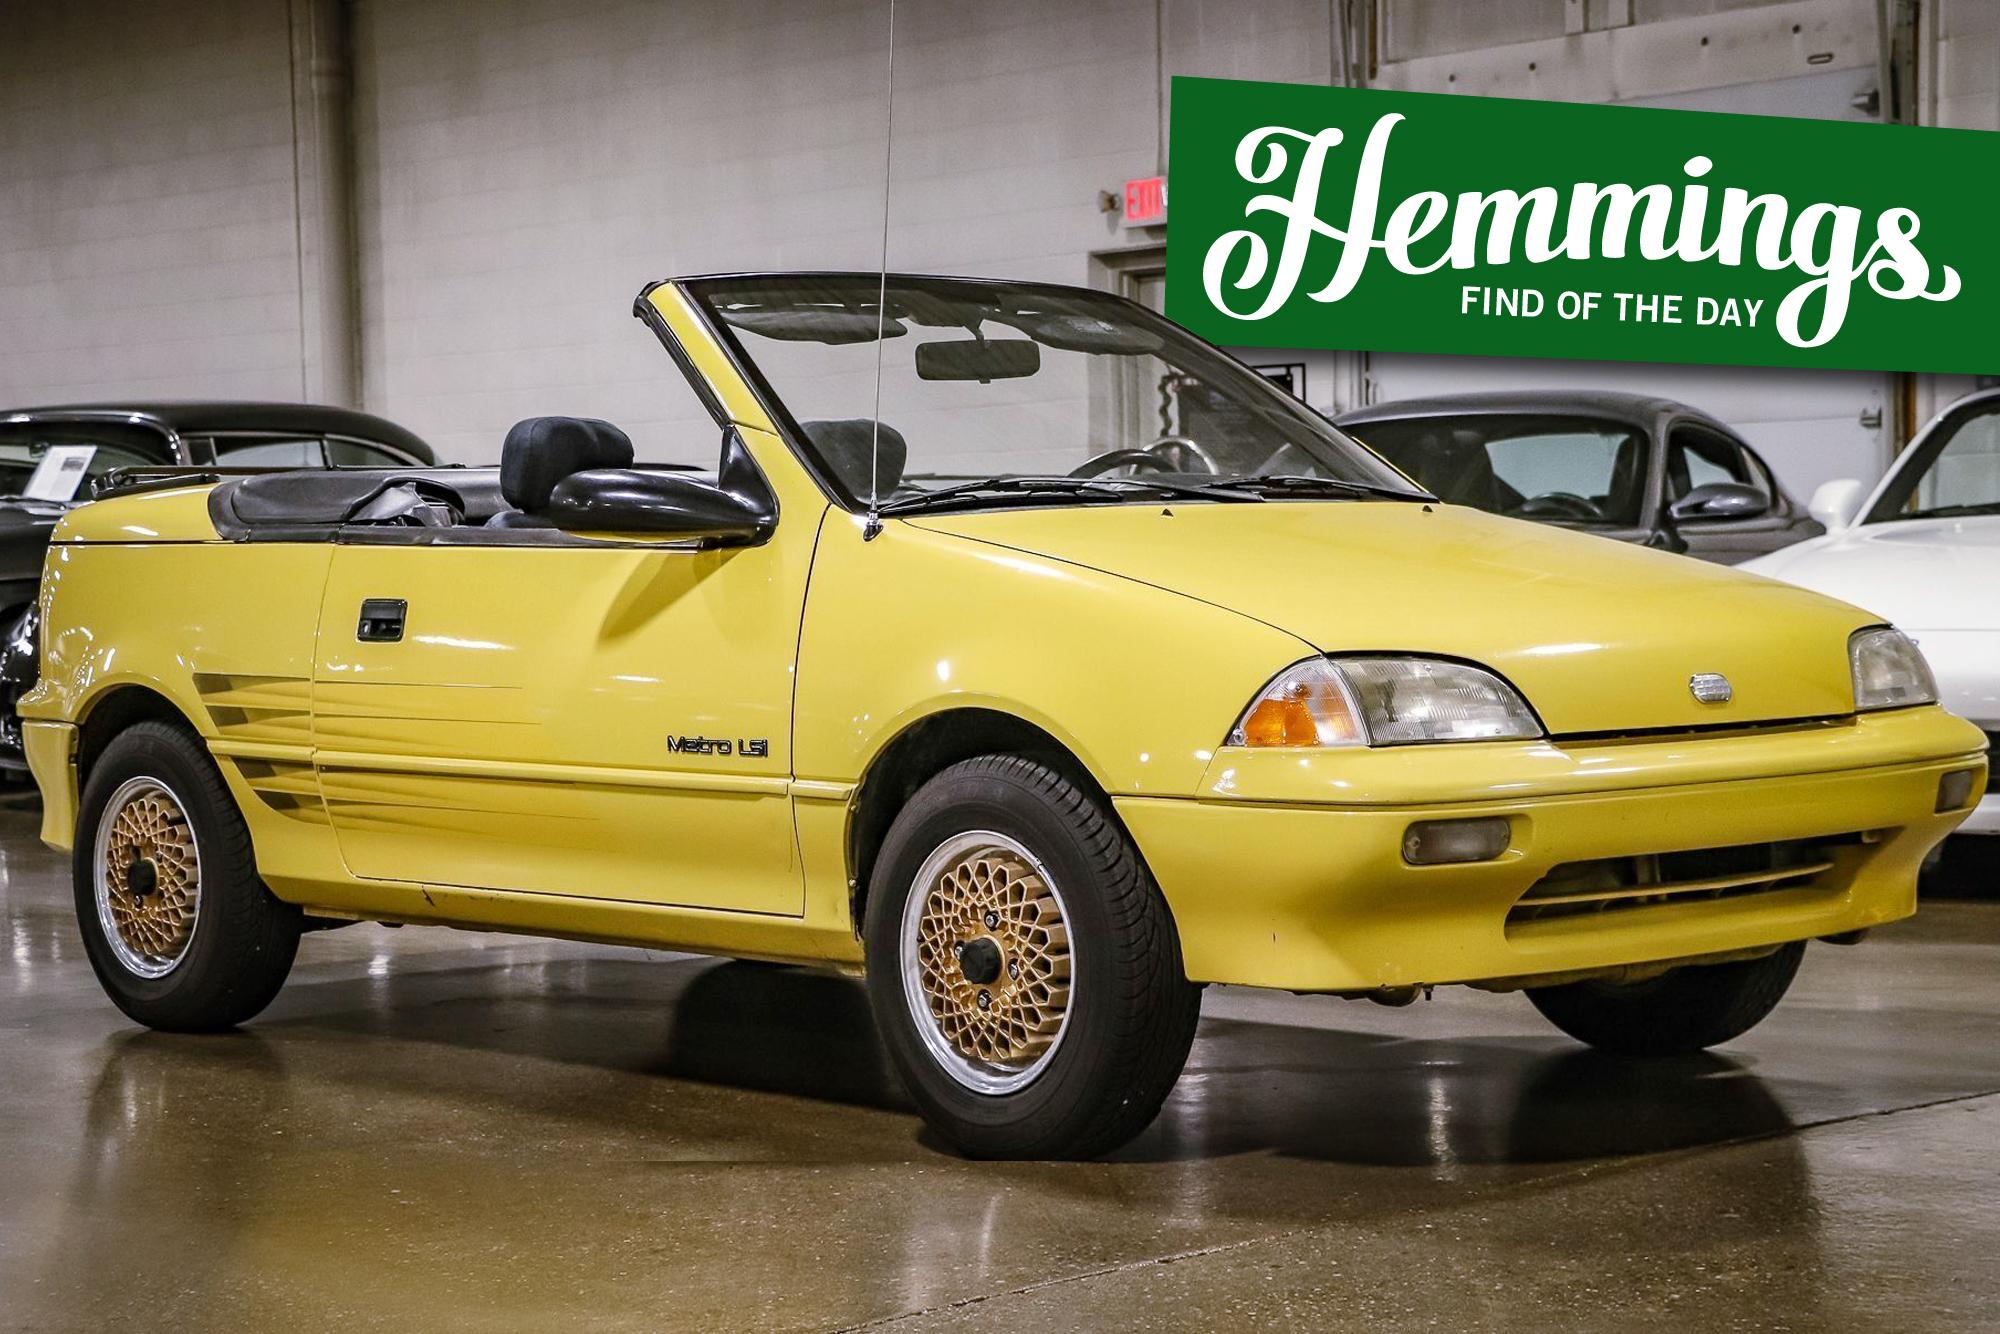 MPG + SPF: 1991 Geo Metro LSi convertible offers thrifty, topless fun